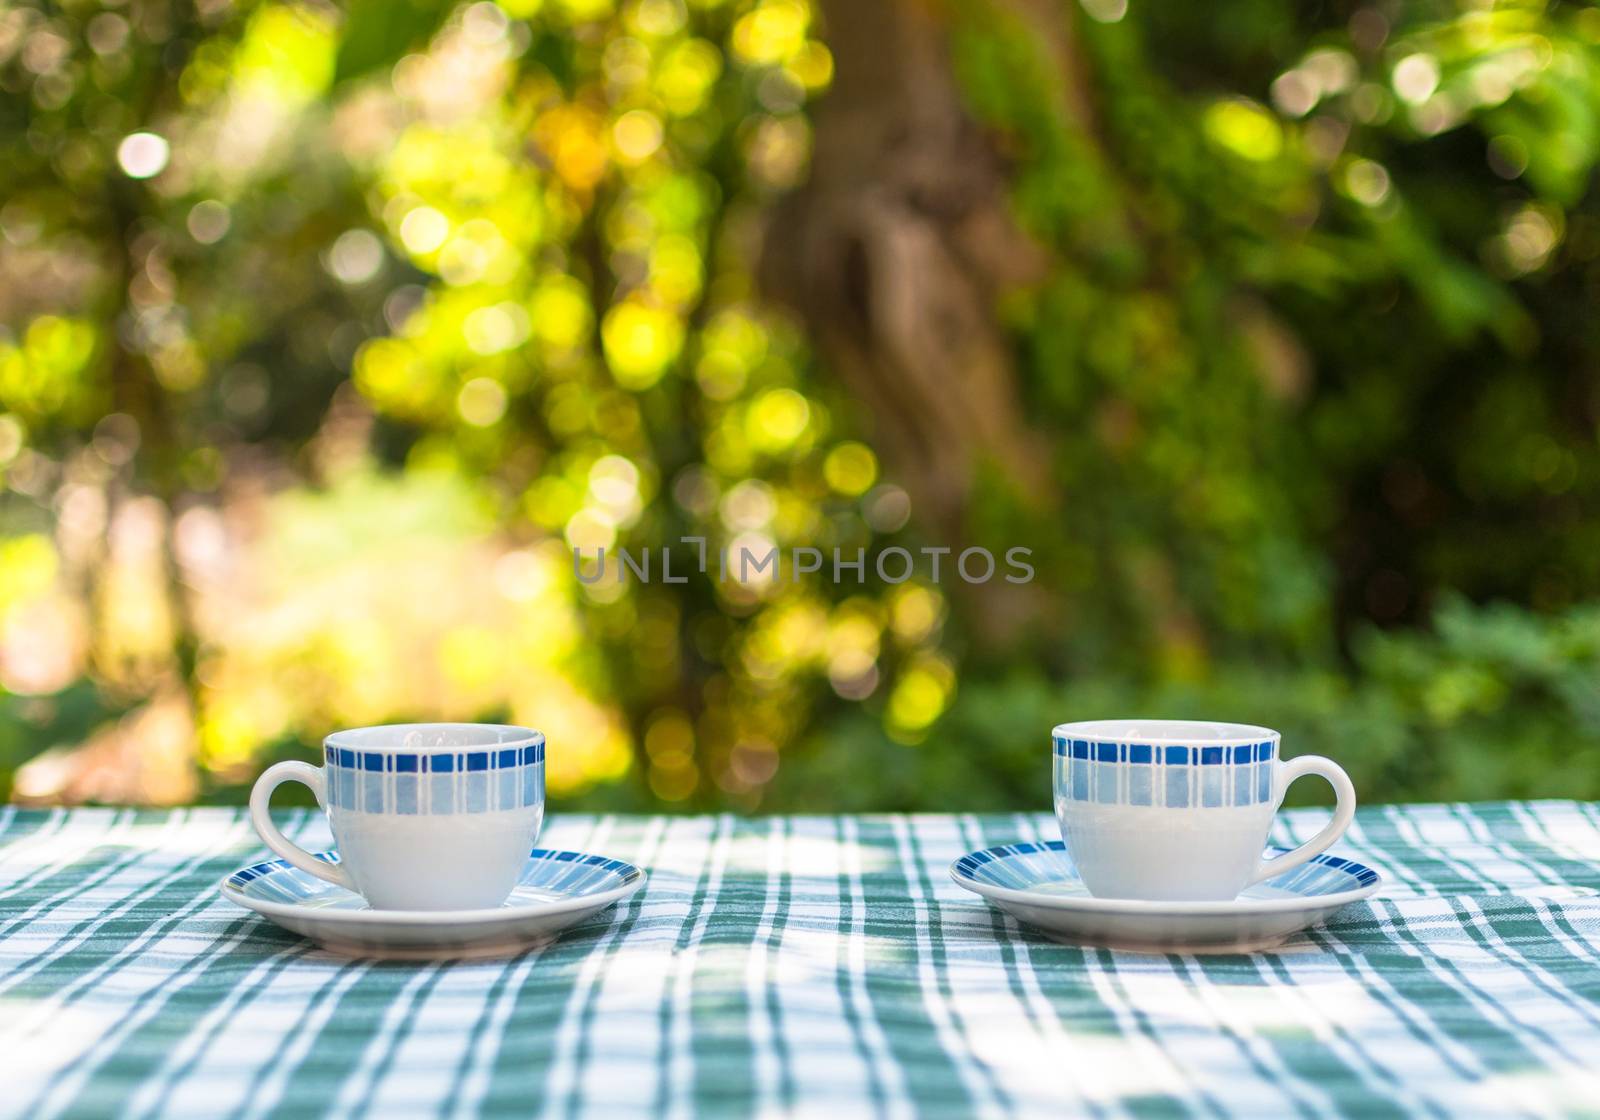 Two little cups of coffee on a table in a garden